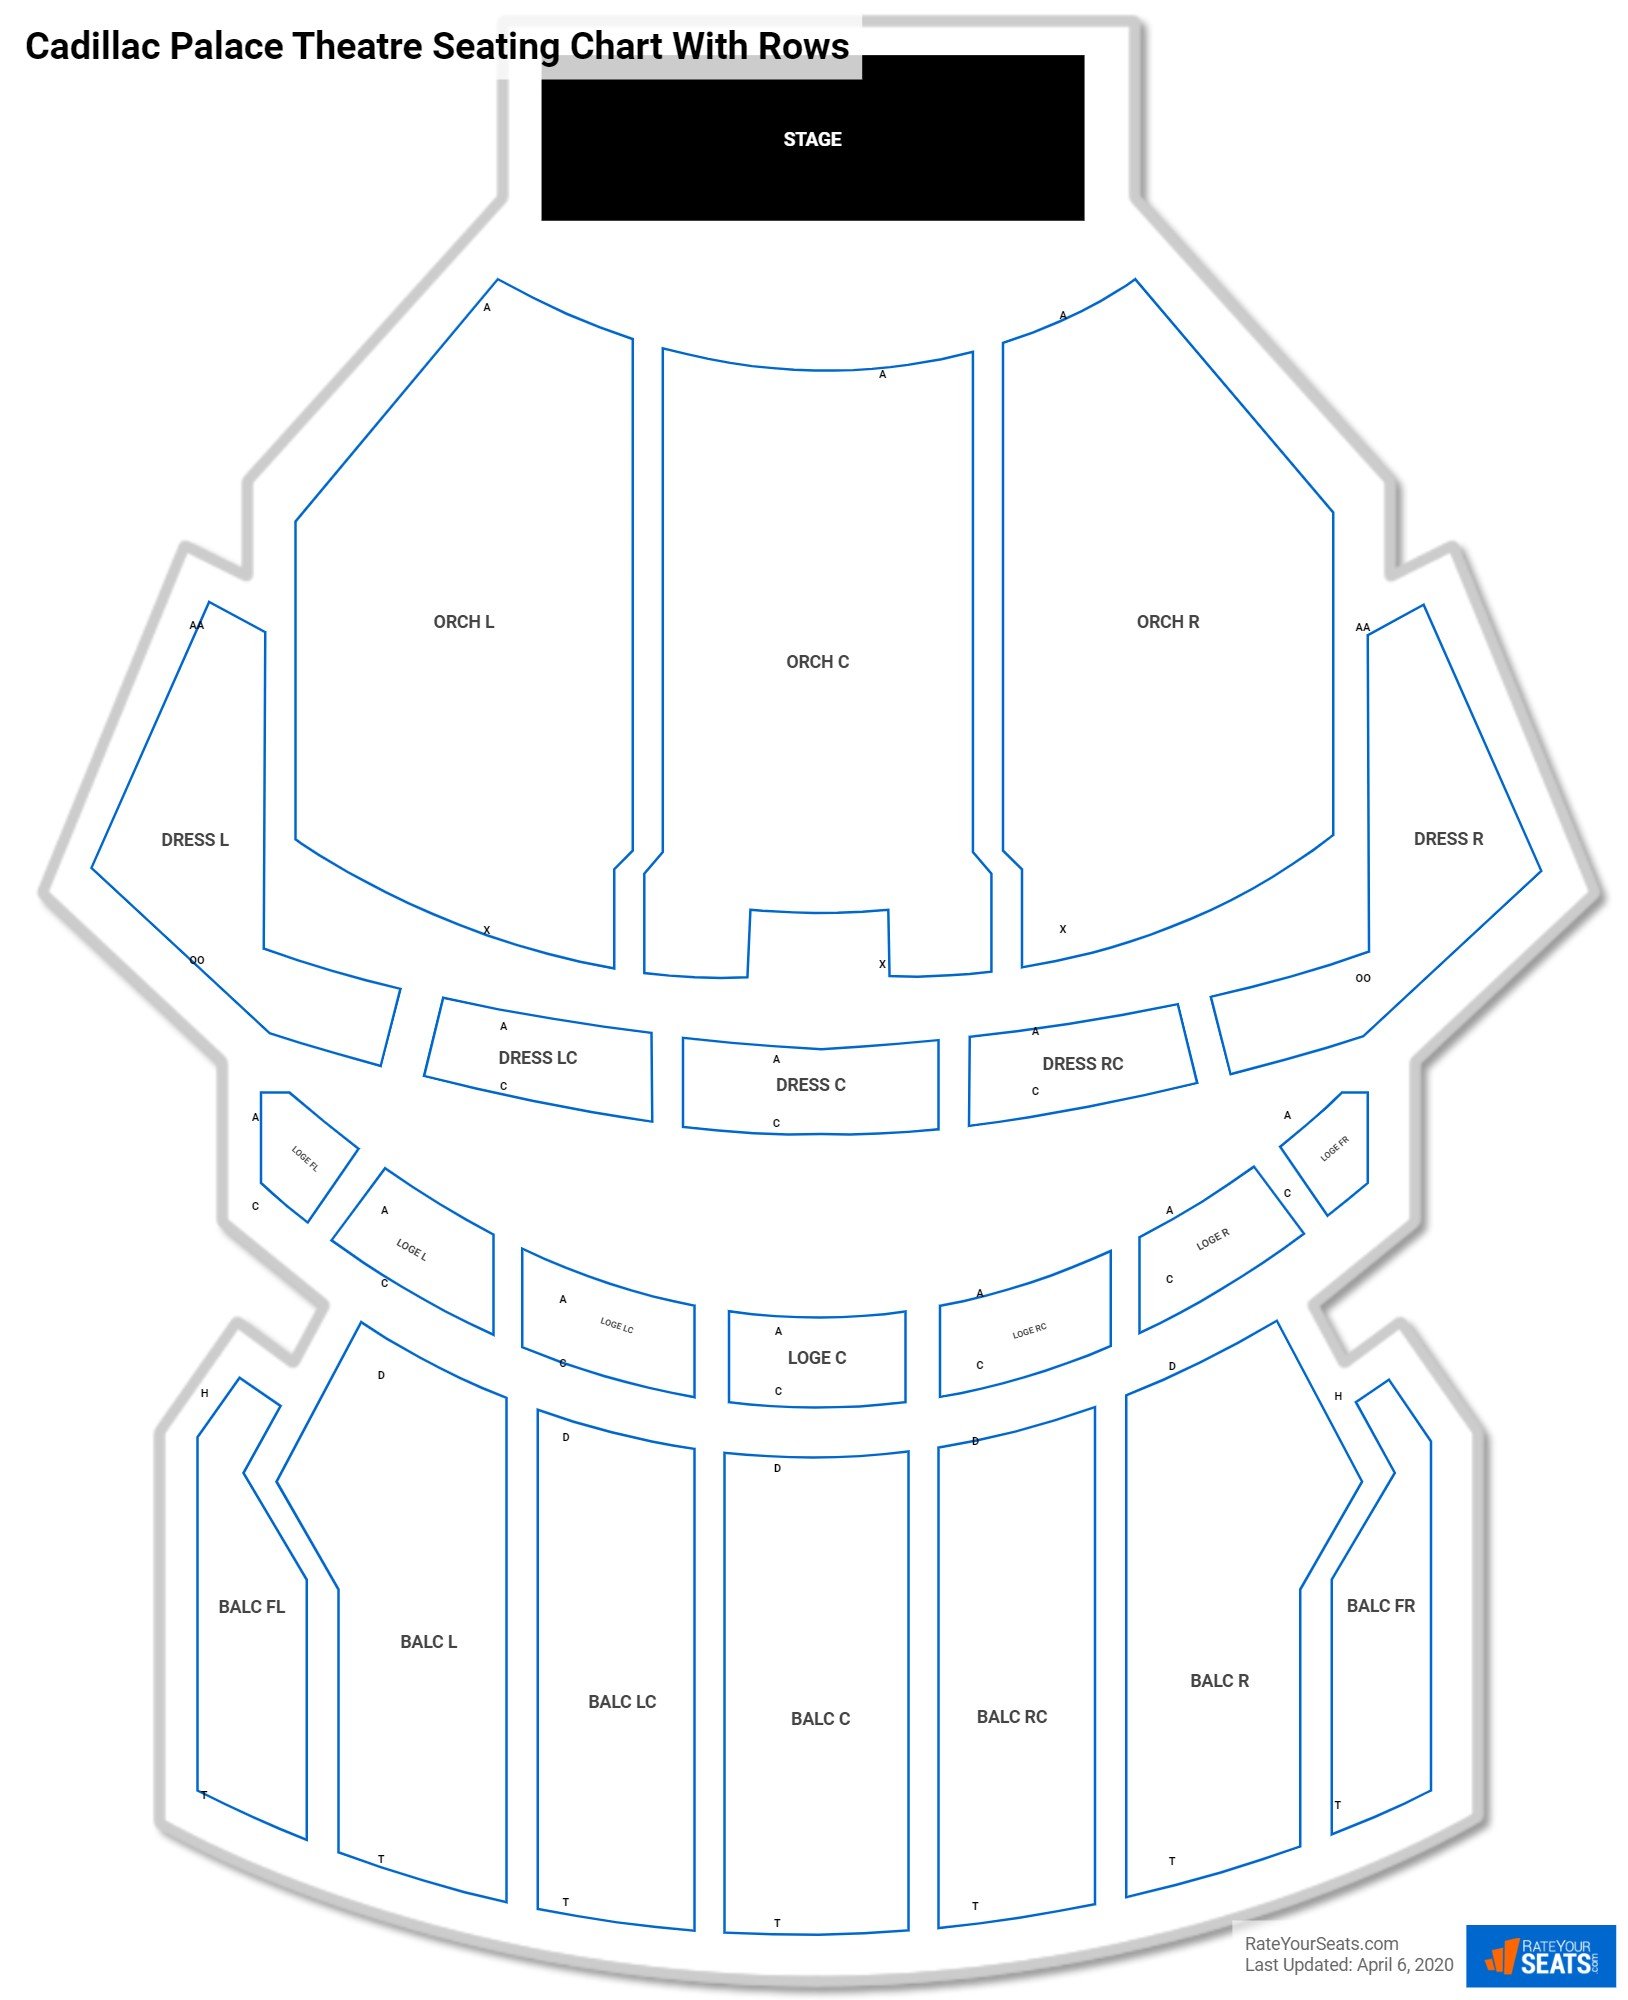 Cadillac Palace Theatre seating chart with row numbers